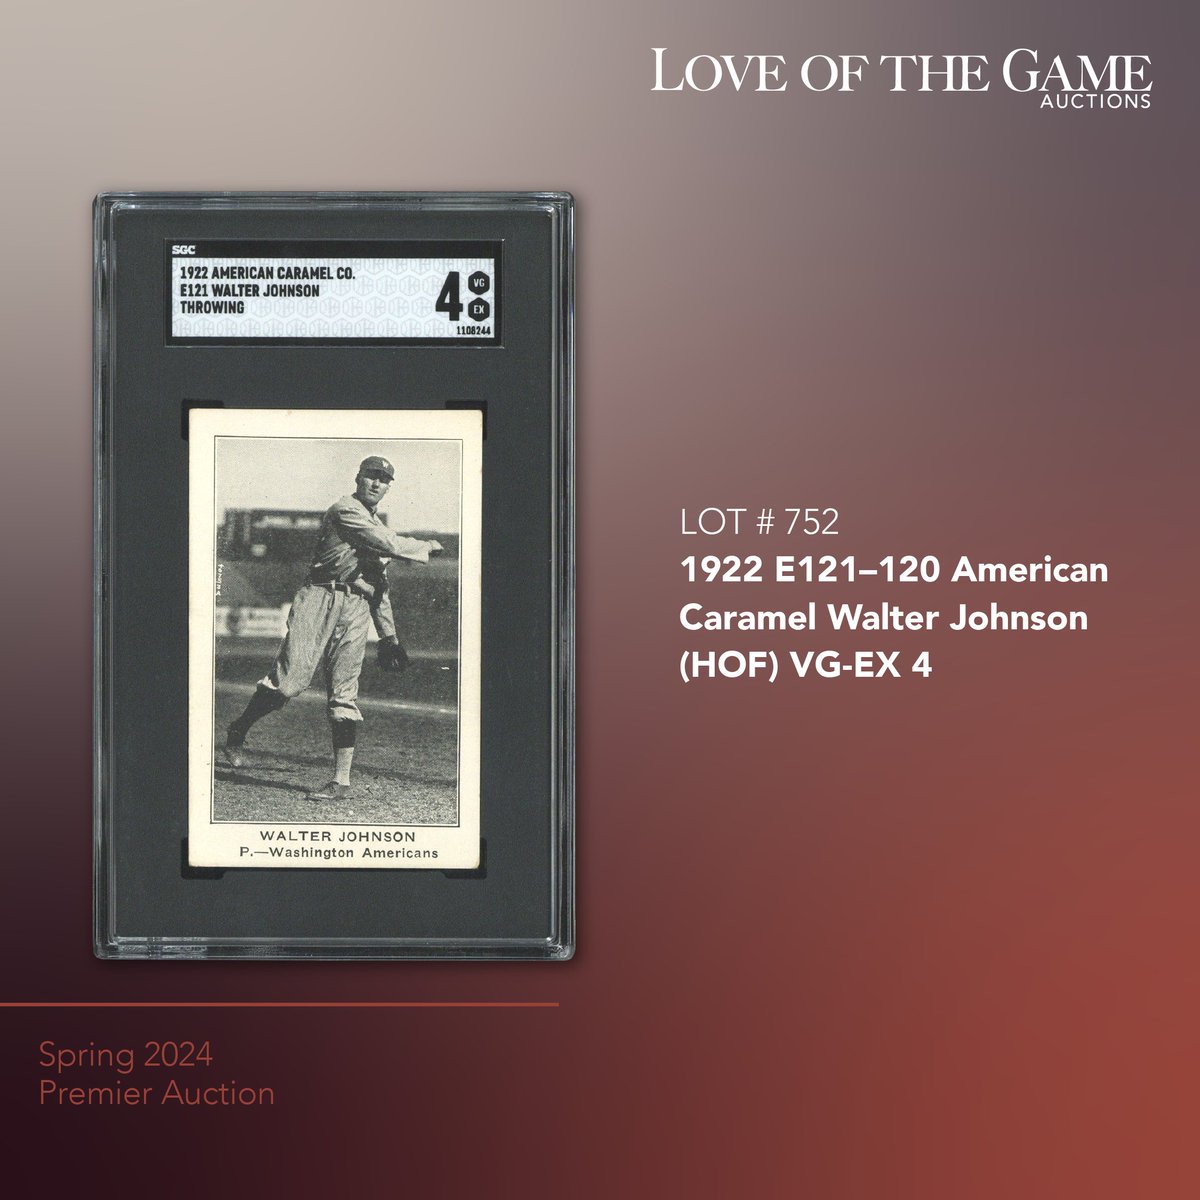 Gorgeous E121-120 American Caramel Walter Johnson, open for bidding in our Spring auction right now at LOTGAuctions.com.  Auction closes Saturday, there's still time to register!  #thehobby #Whodoyoucollect #LOTGAuctions #BigTrain #WaJo #GoSGC